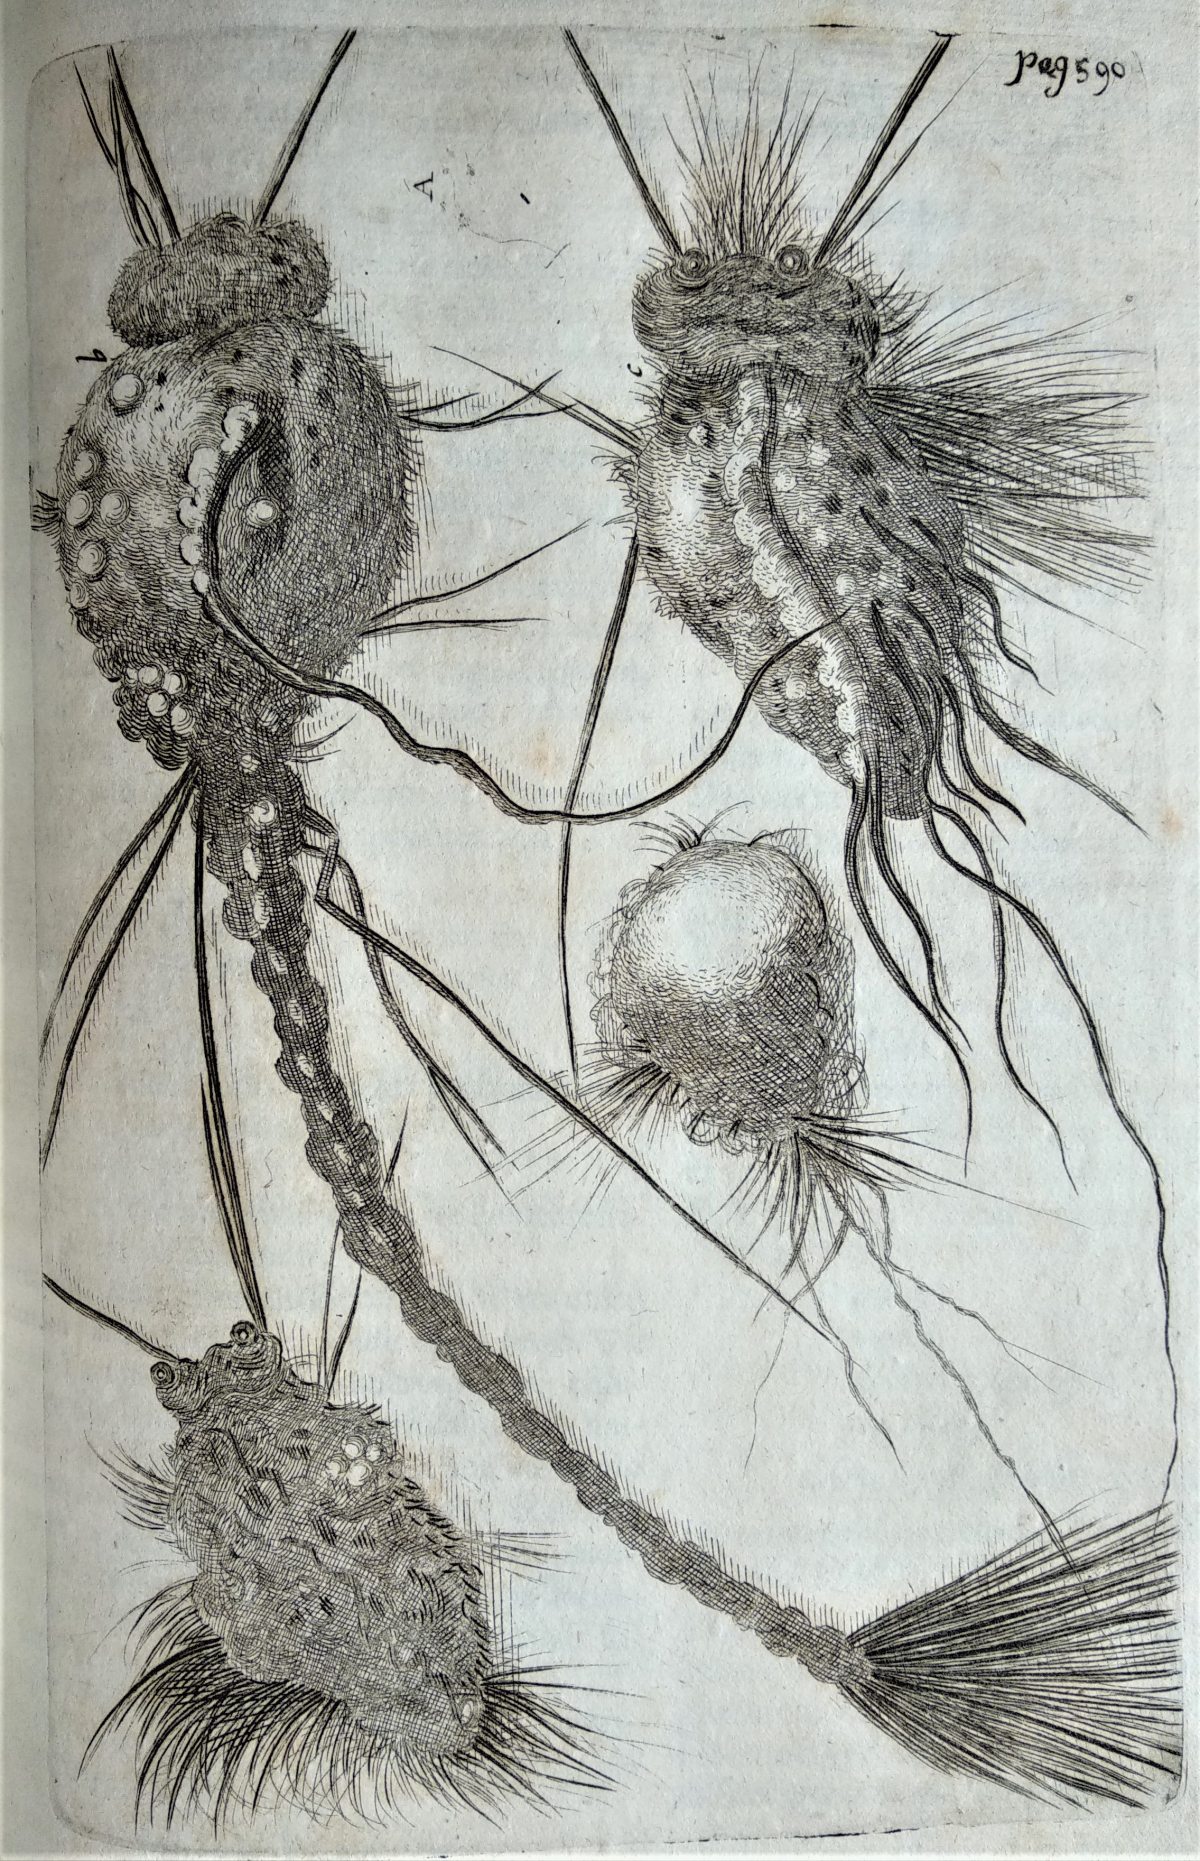 An etched illustration of different specimens of a hairy parasitic worm.